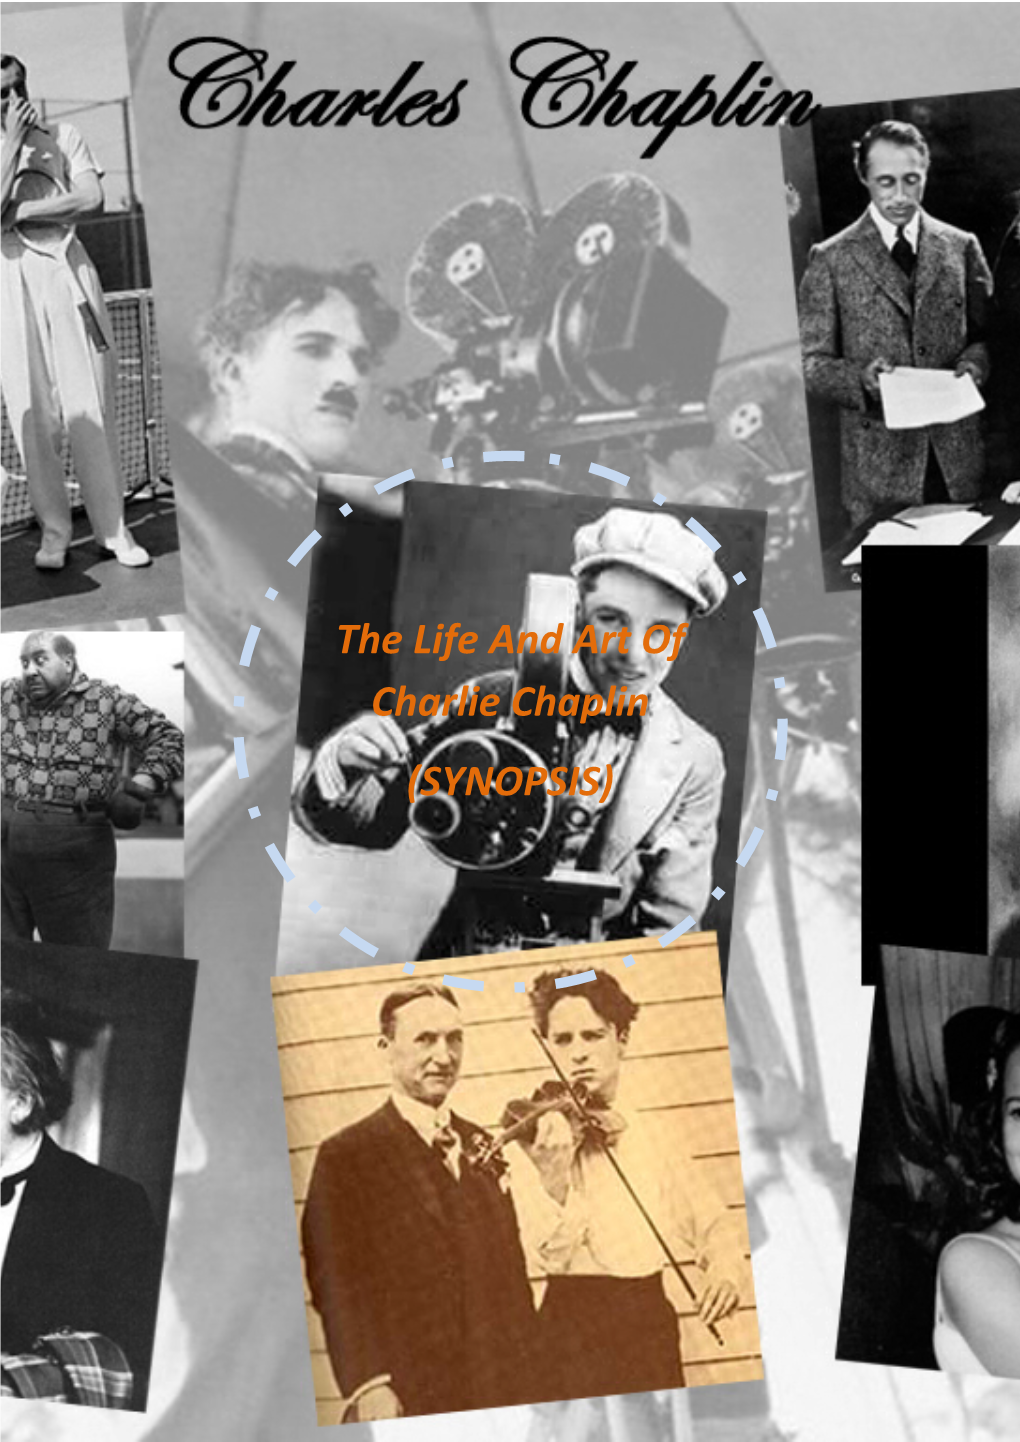 The Life and Art of Charlie Chaplin (SYNOPSIS)